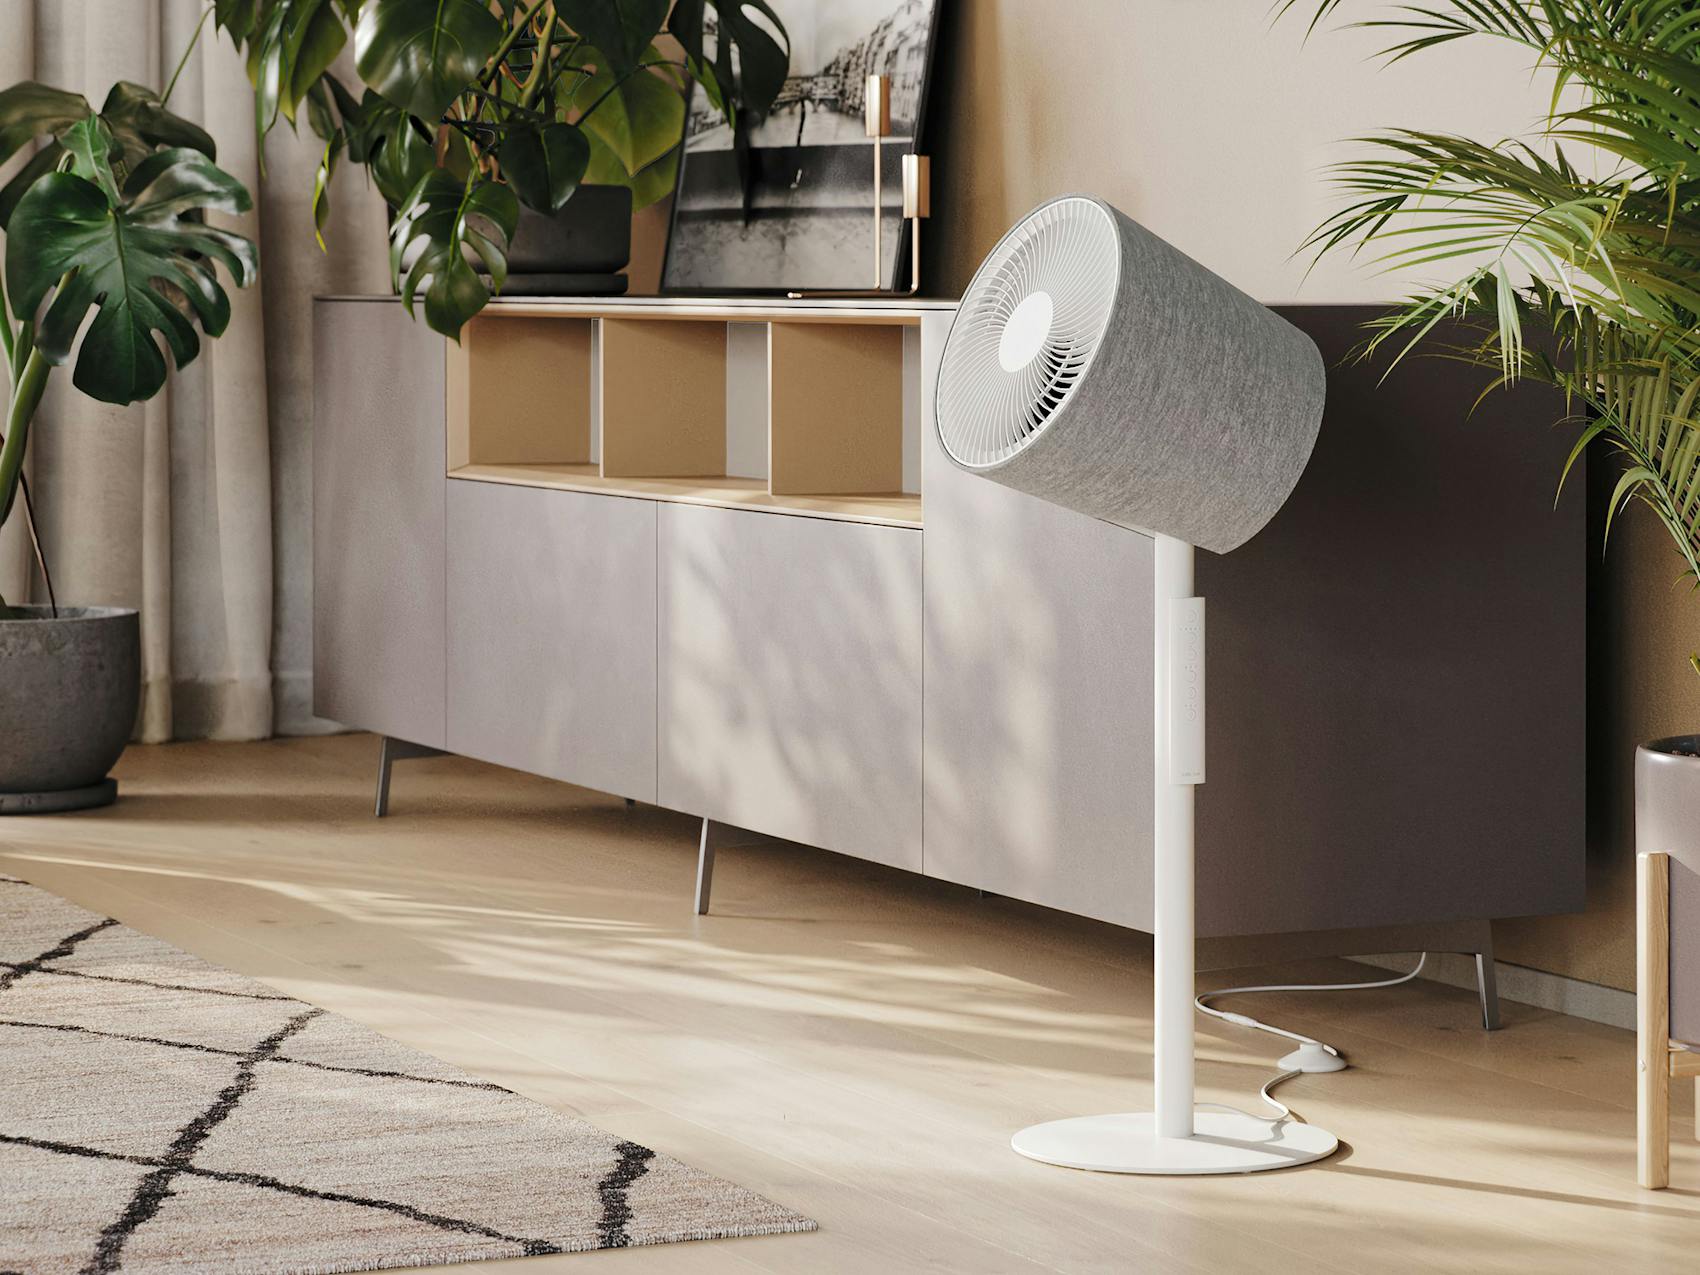 Simon fan by Stadler Form in white in a living room with plants